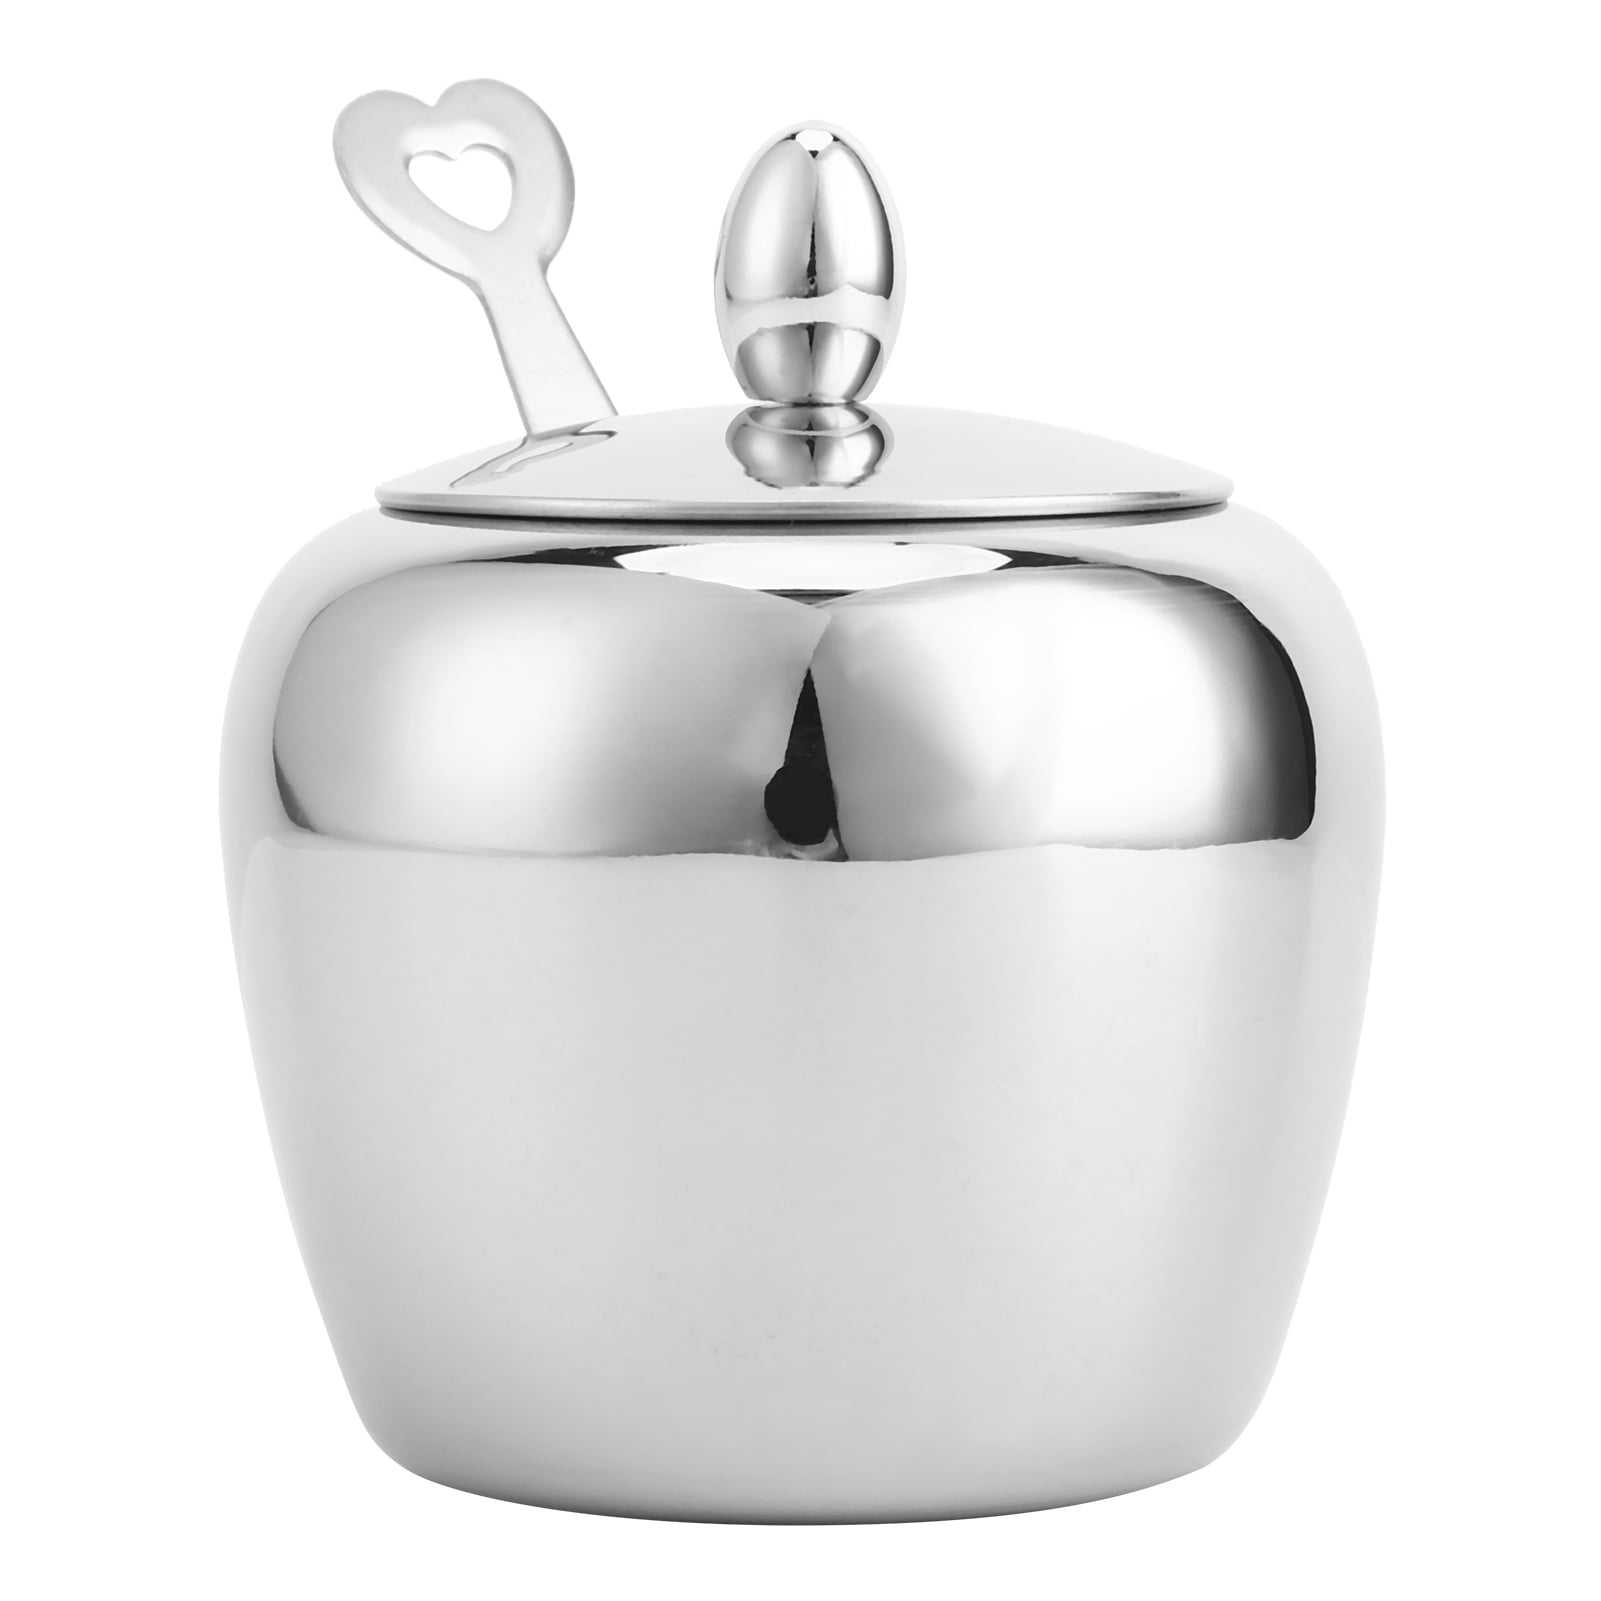 Stainless Steel Sugar Bowl With Lip Spoon Home Kitchen Salt Pepper Spices Bowl